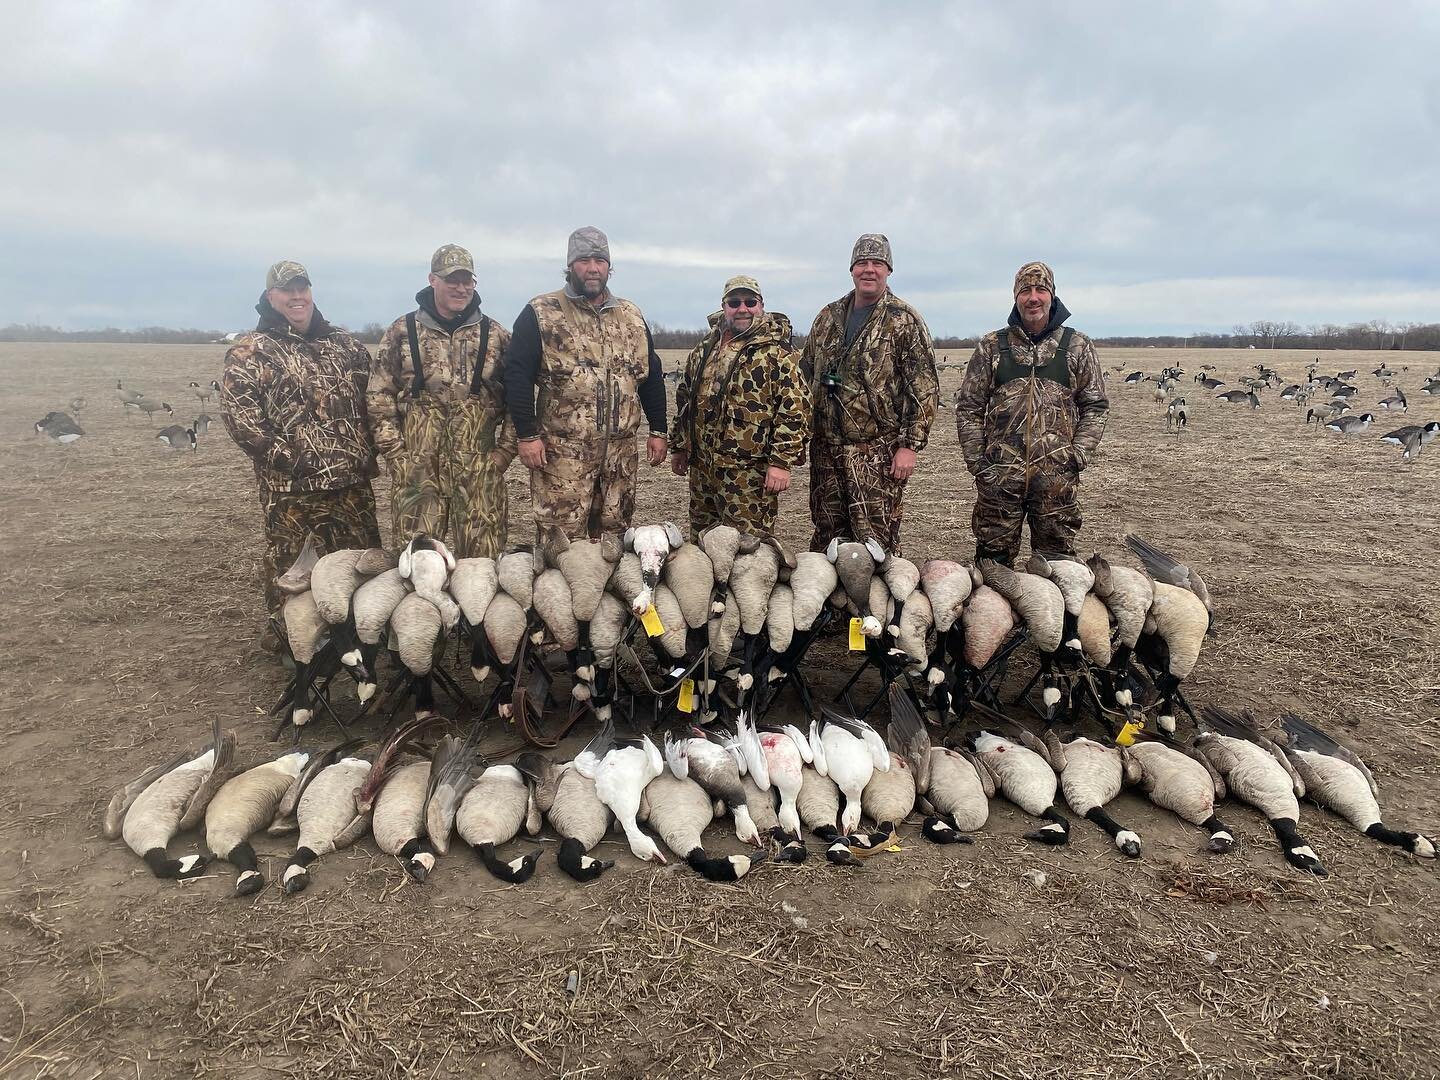 Big news coming soon👀 Our True Kansas Outdoors is thrilled to announce that we'll soon be opening our books for the 2023/2024 waterfowl season very soon! Stay tuned for your opportunity to book an unforgettable hunting experience like no other.&rdqu